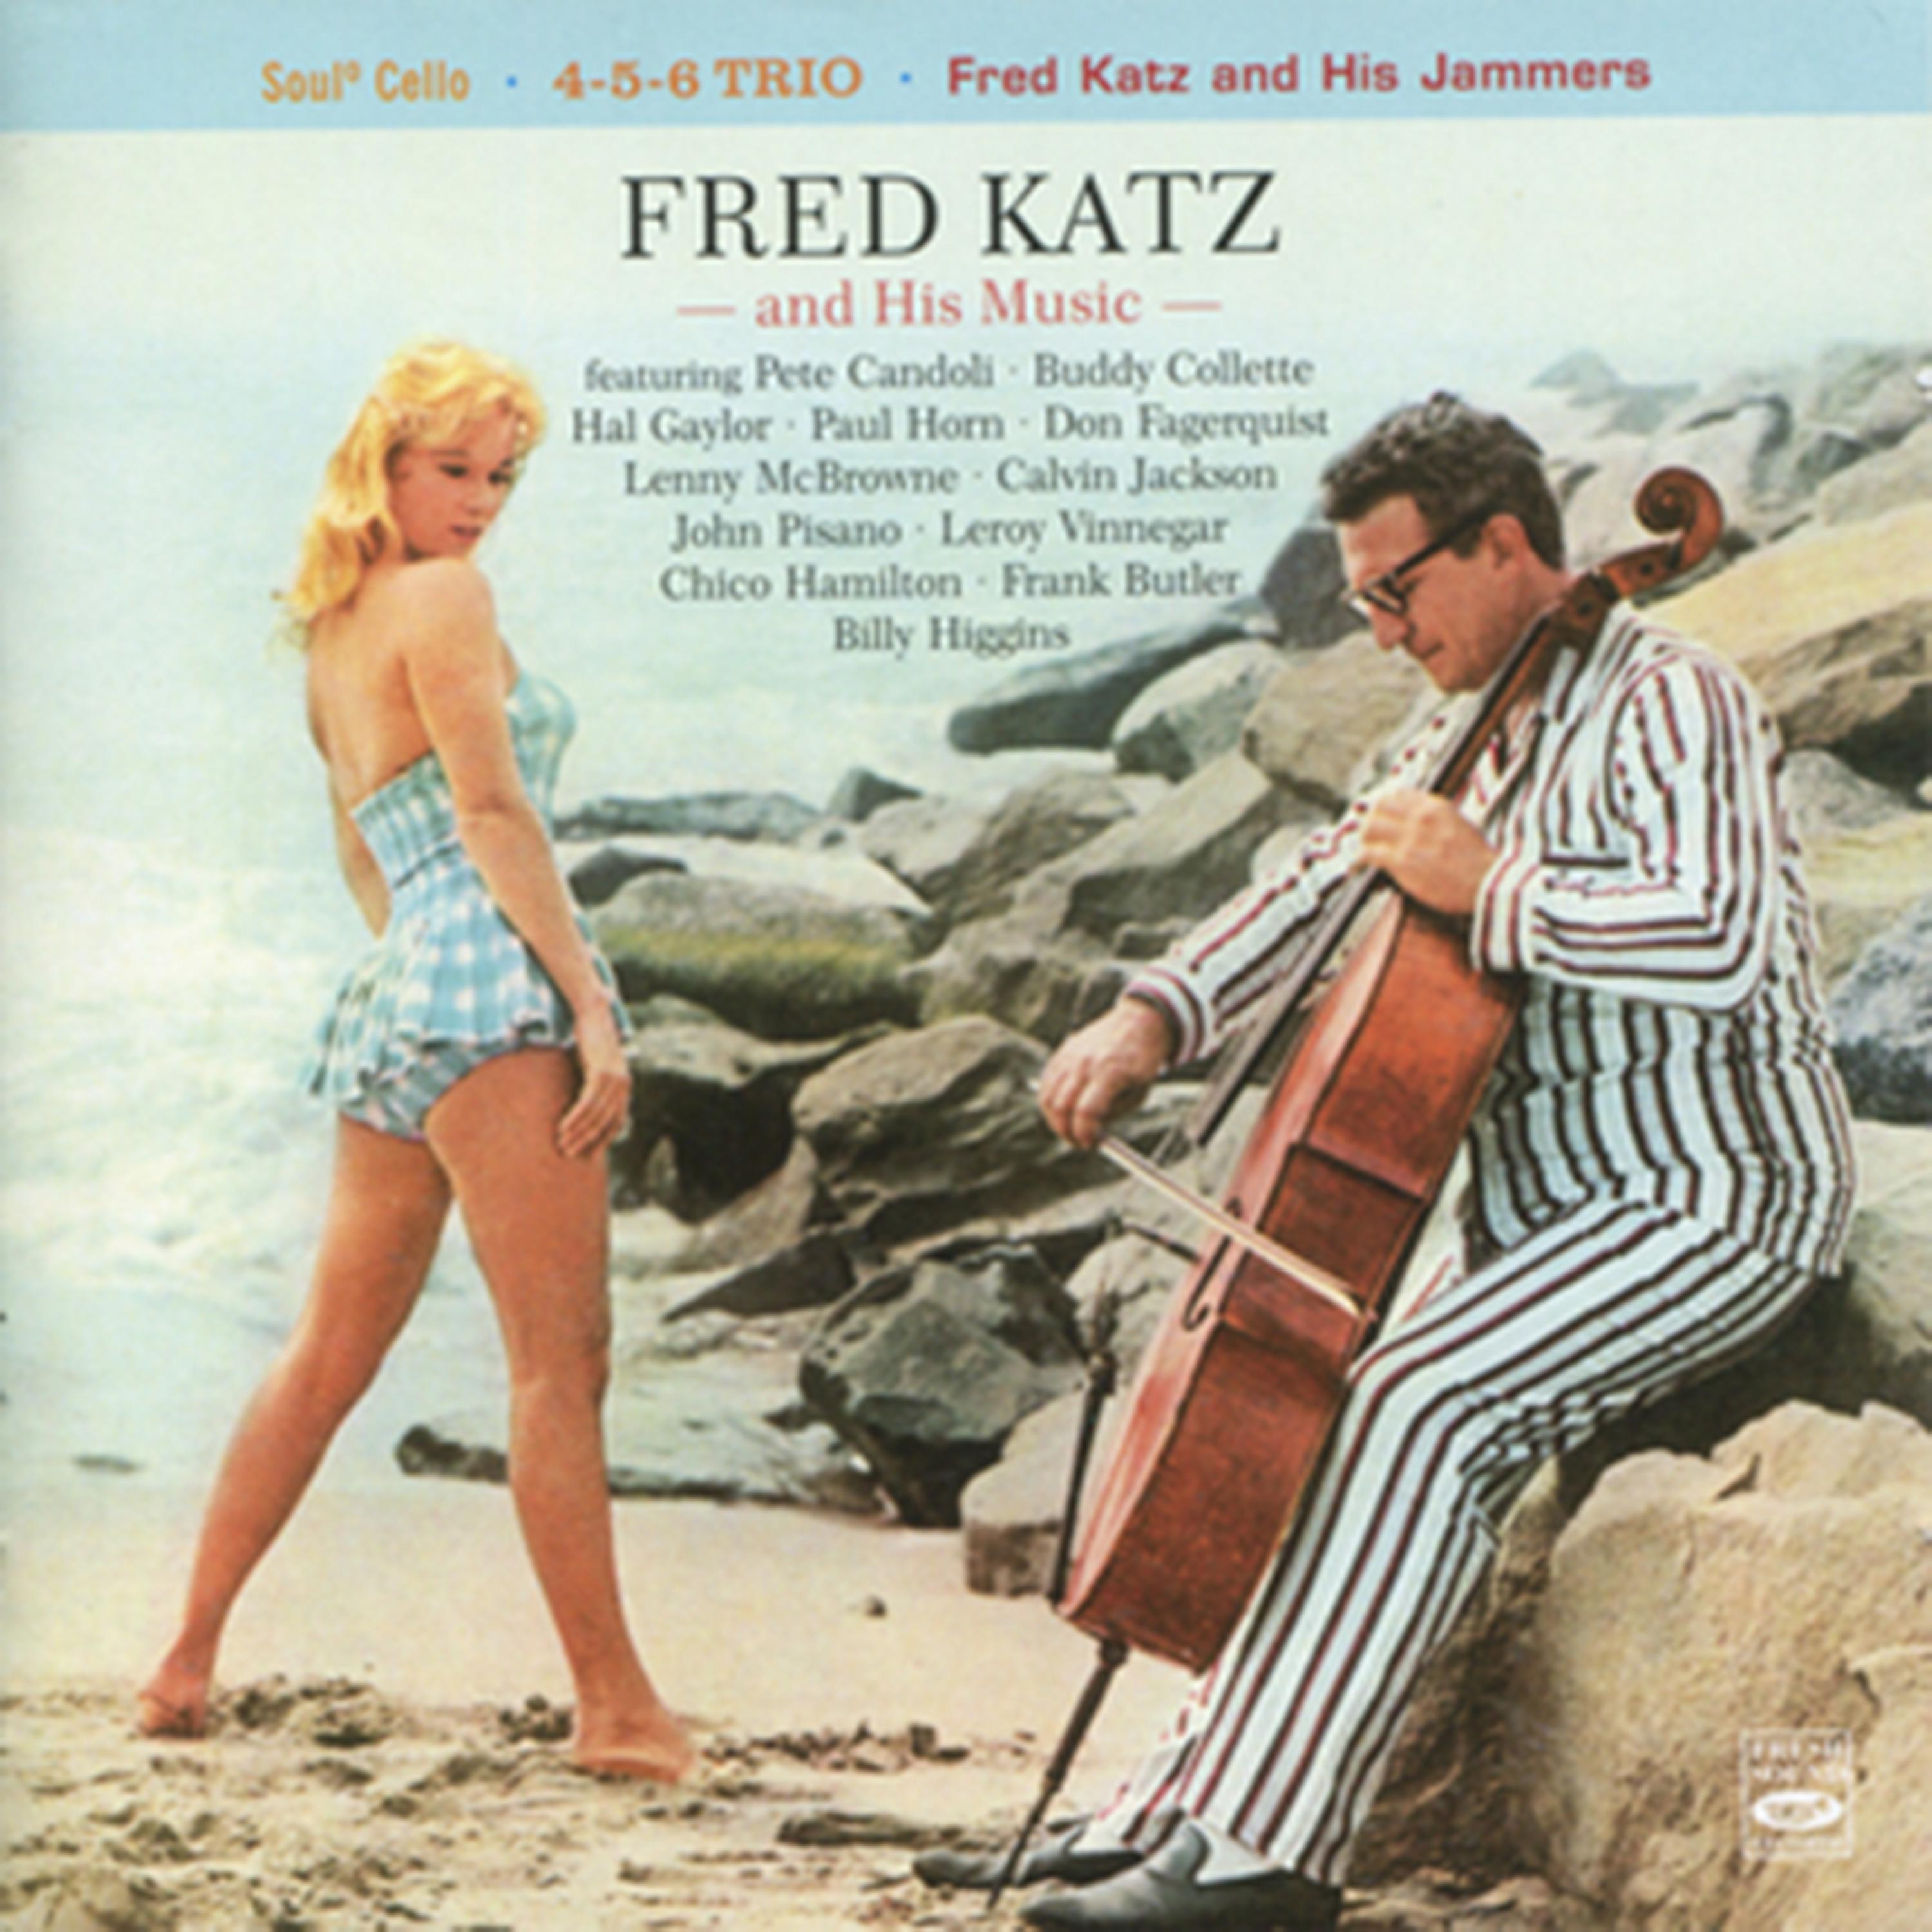 Постер альбома Fred Katz and His Music: Soul Cello / 4-5-6 Trio / Fred Katz and His Jammers